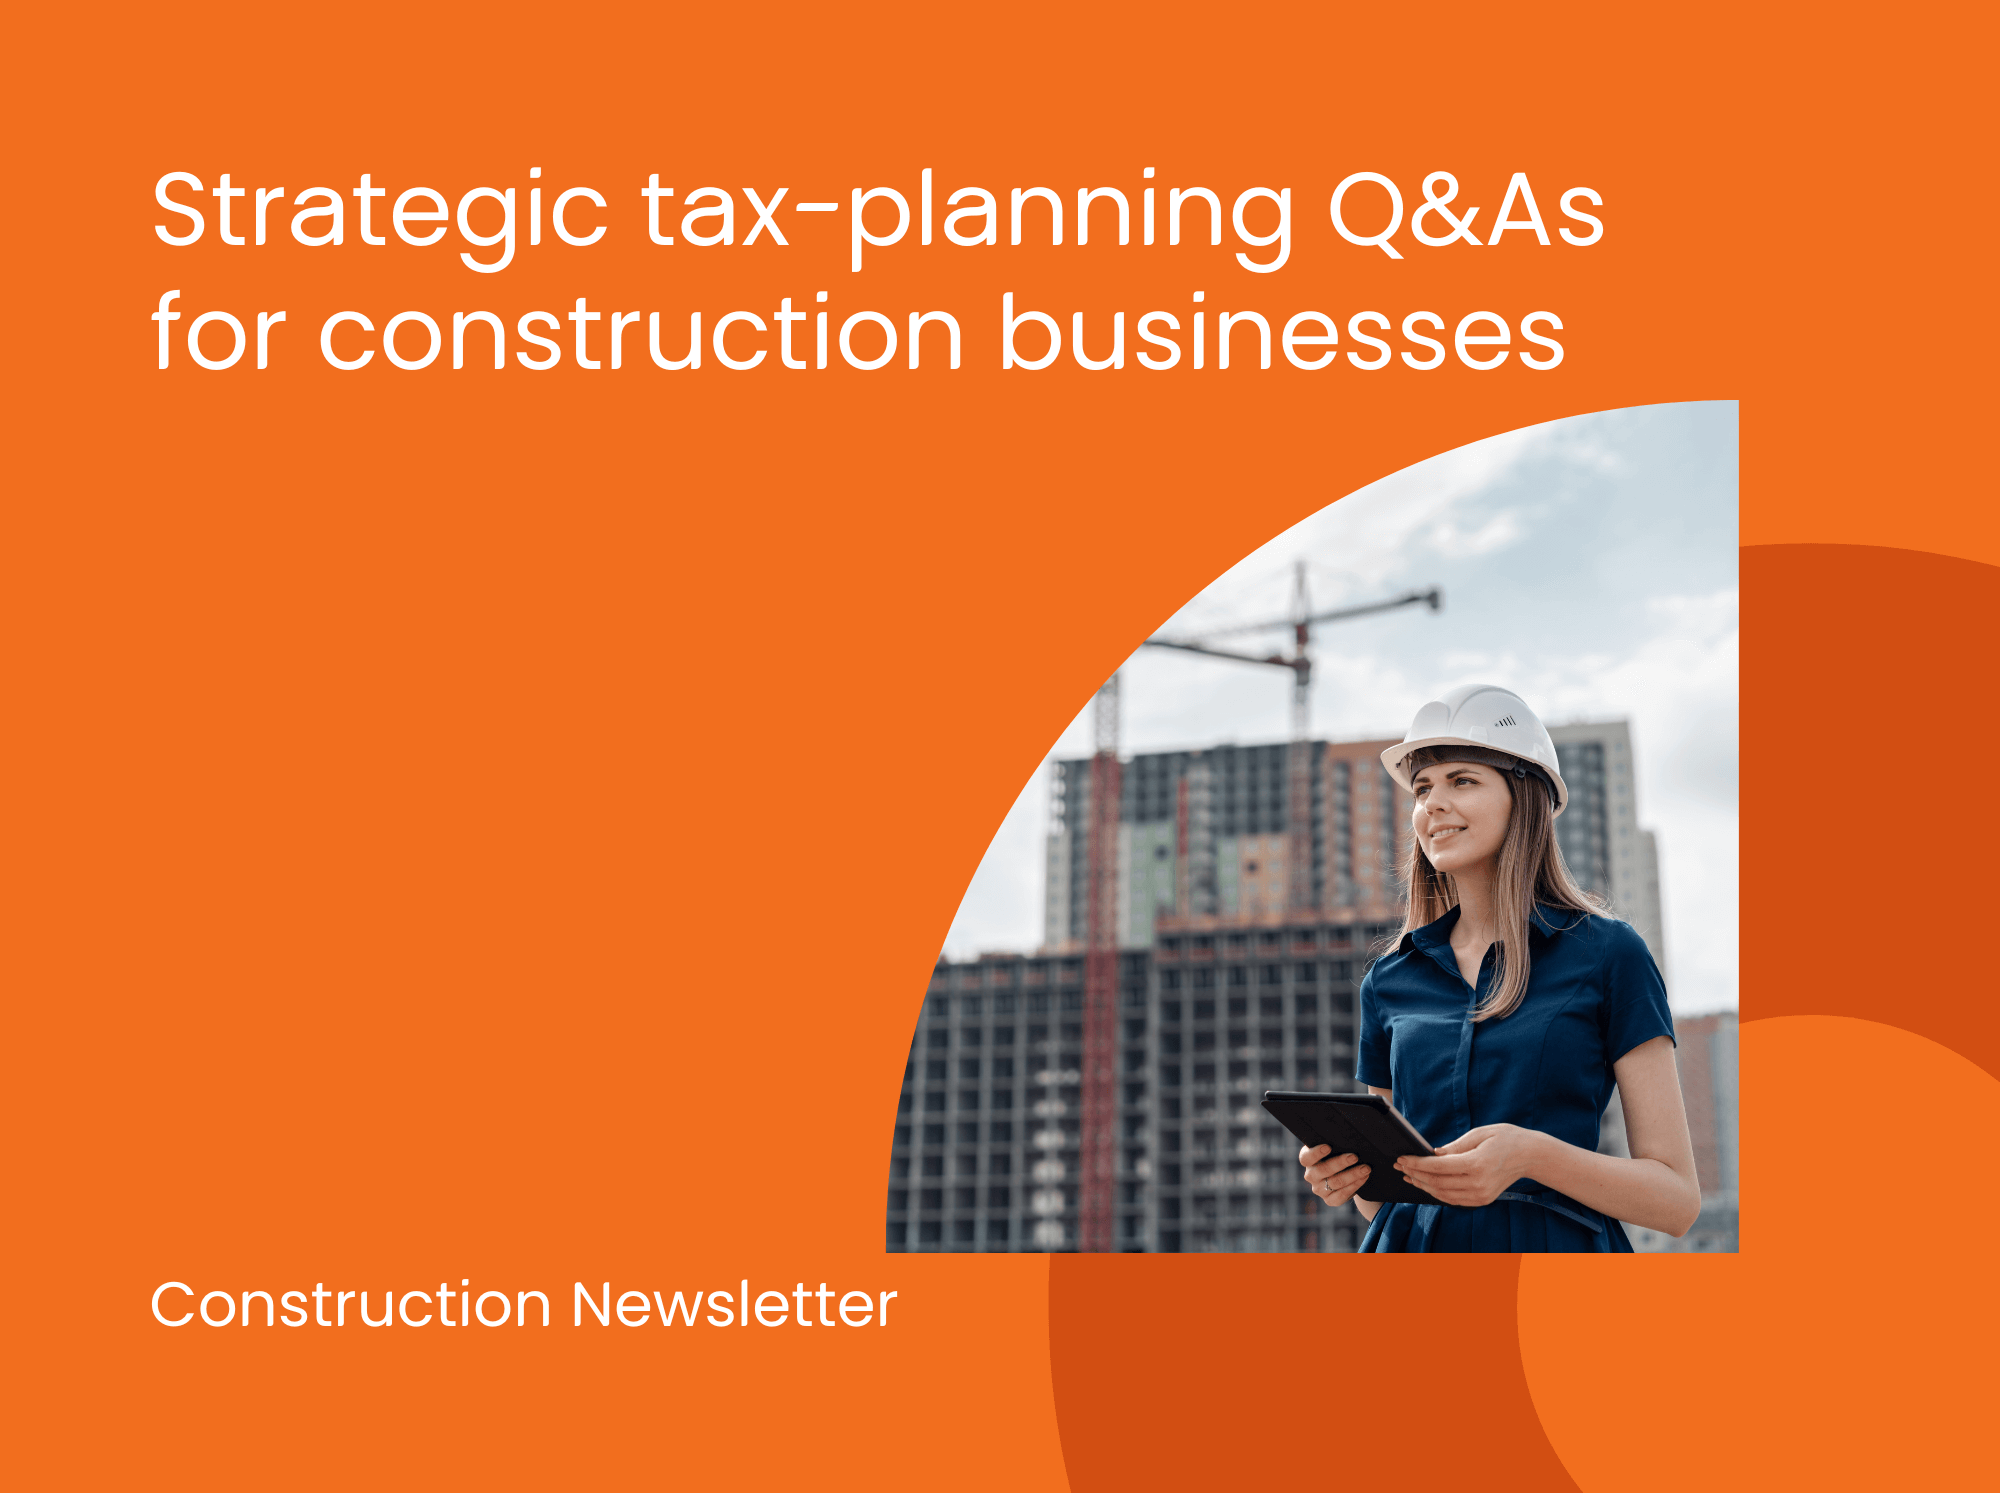 Strategic tax-planning Q&As for construction businesses